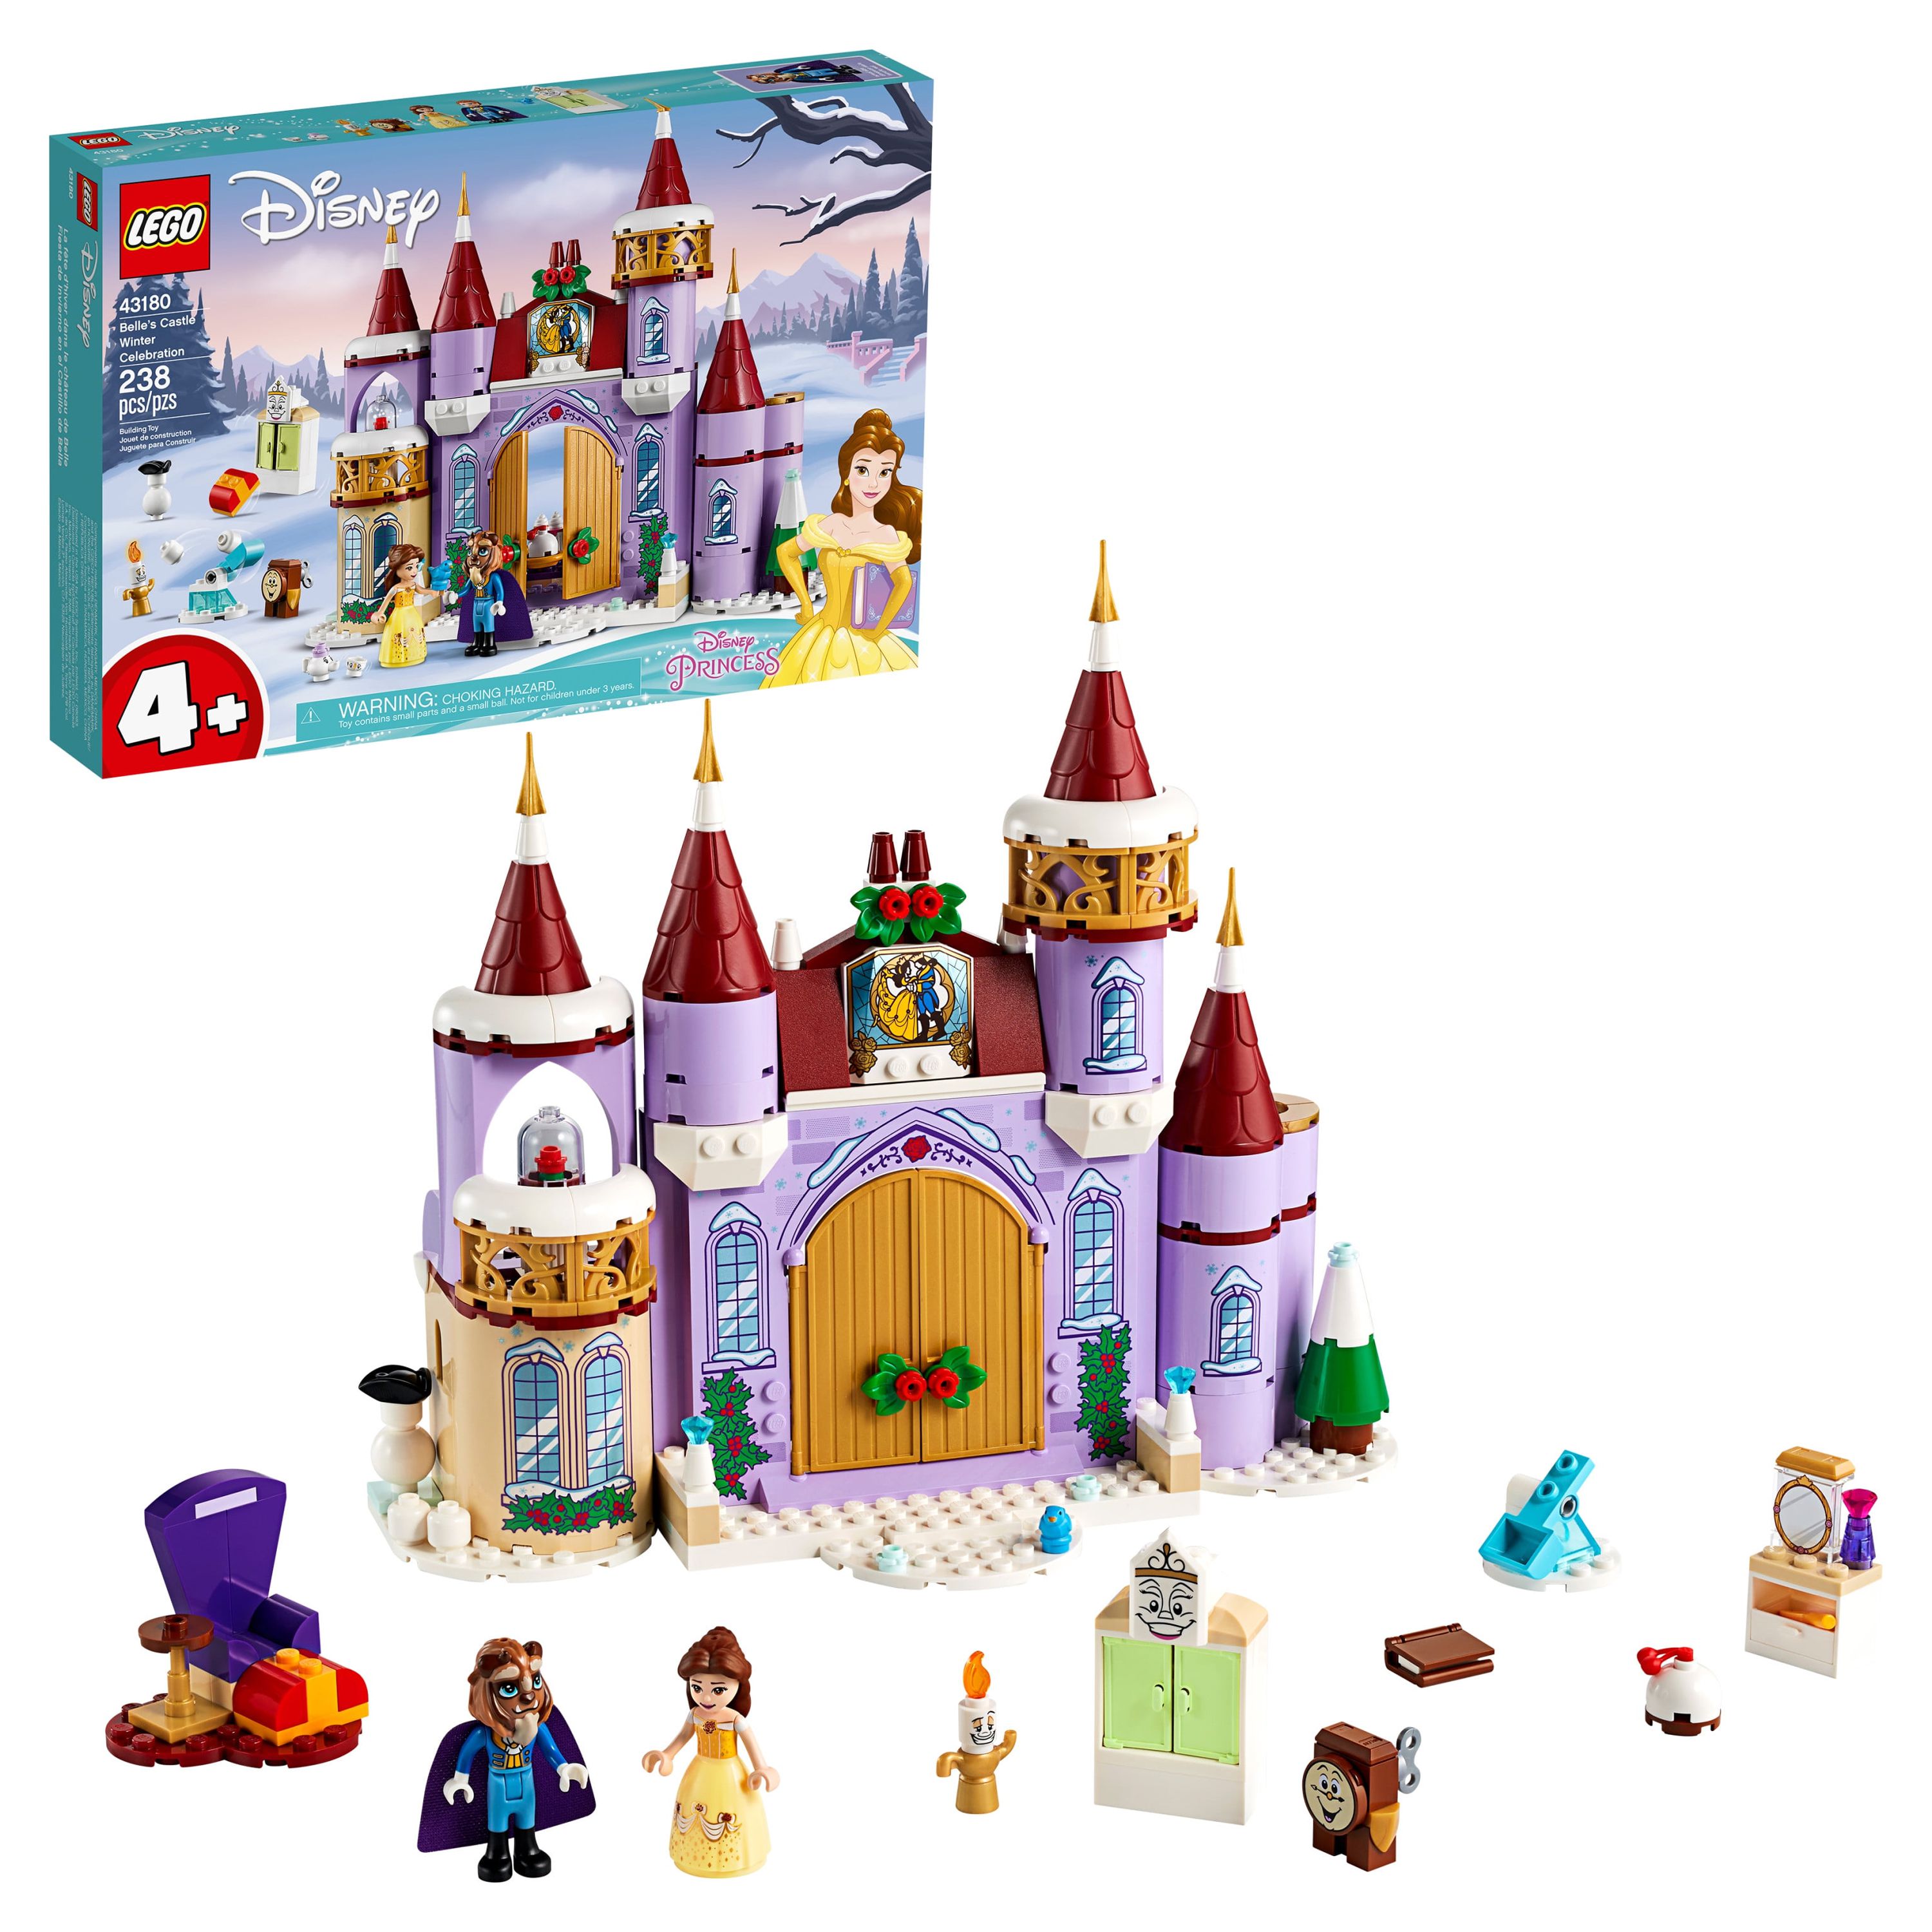 LEGO Disney Princess Series - Beauty and the Beast - Belle's Castle Winter Celebration 43180 - image 1 of 8